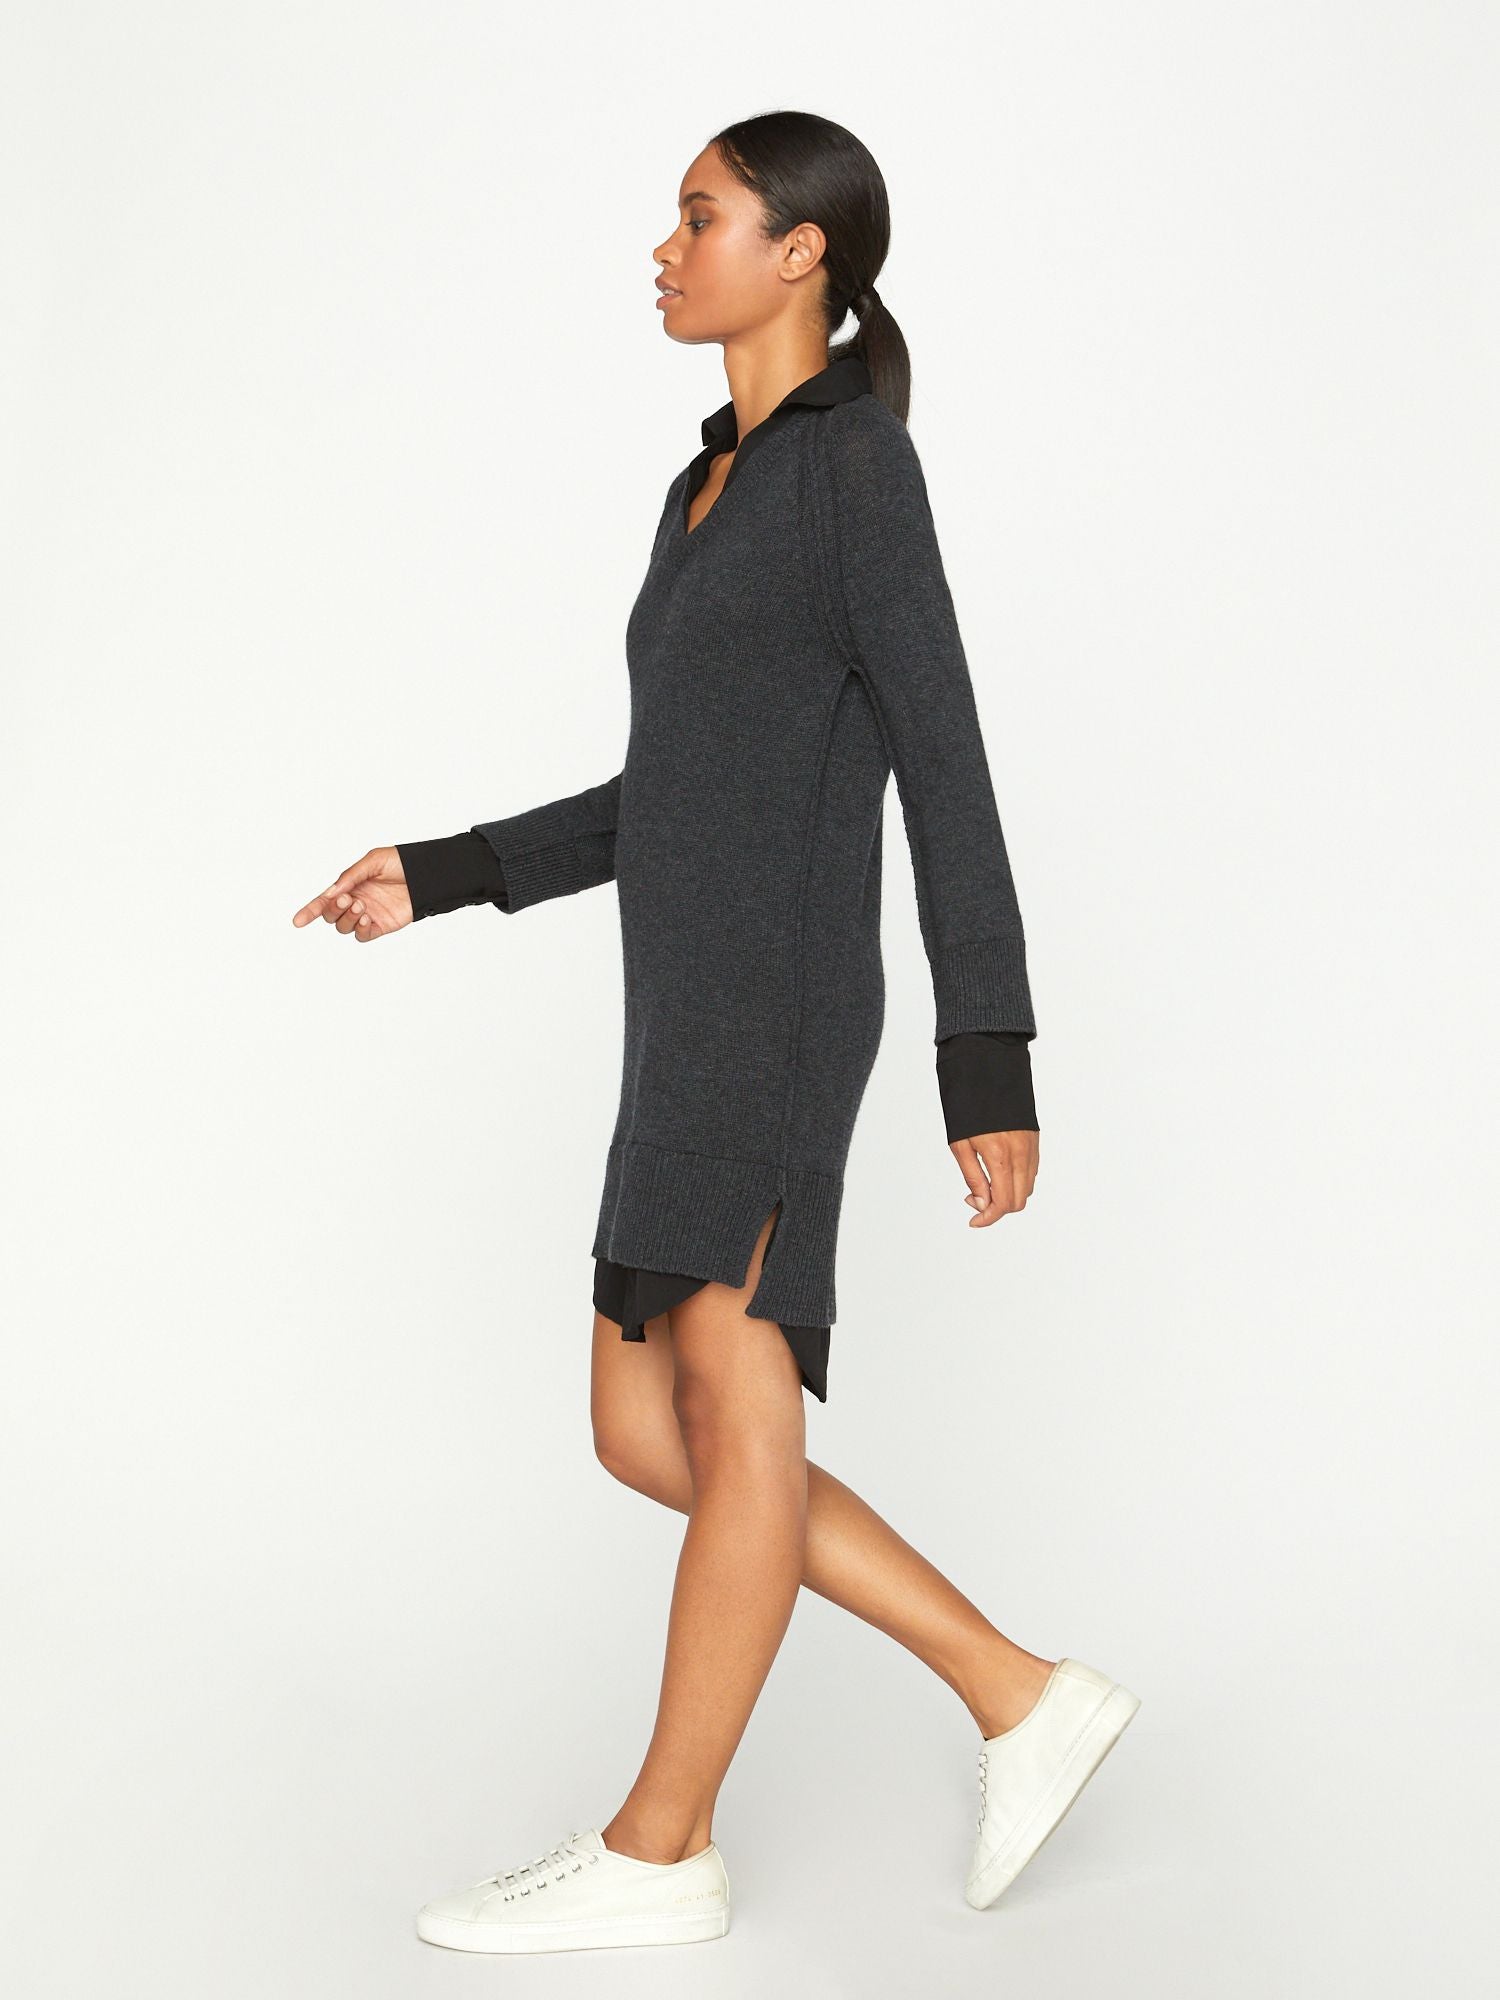 Buy Casual Trim Knitted Sweater Dress Loose Turtleneck Dress Big Face Line  M Black at Amazon.in